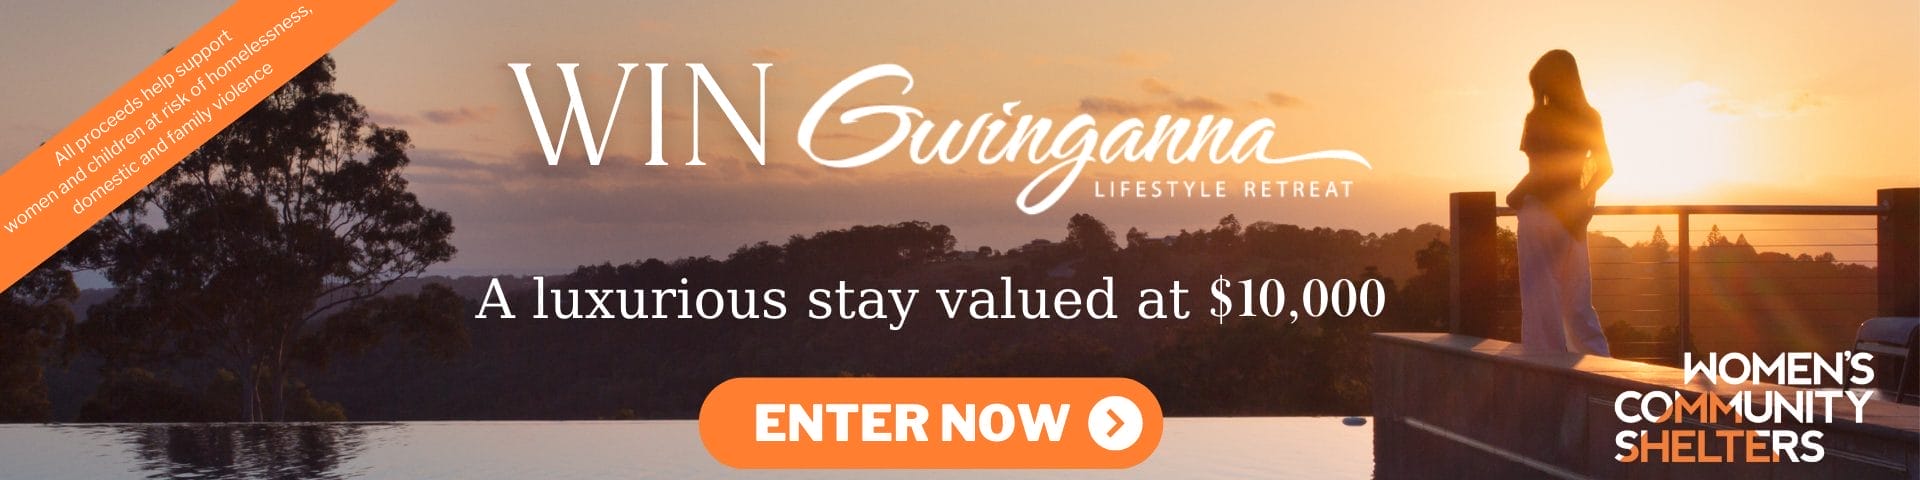 Gwinganna Lifestyle Retreat Raffle - supporting the work of Women's Community Shelters